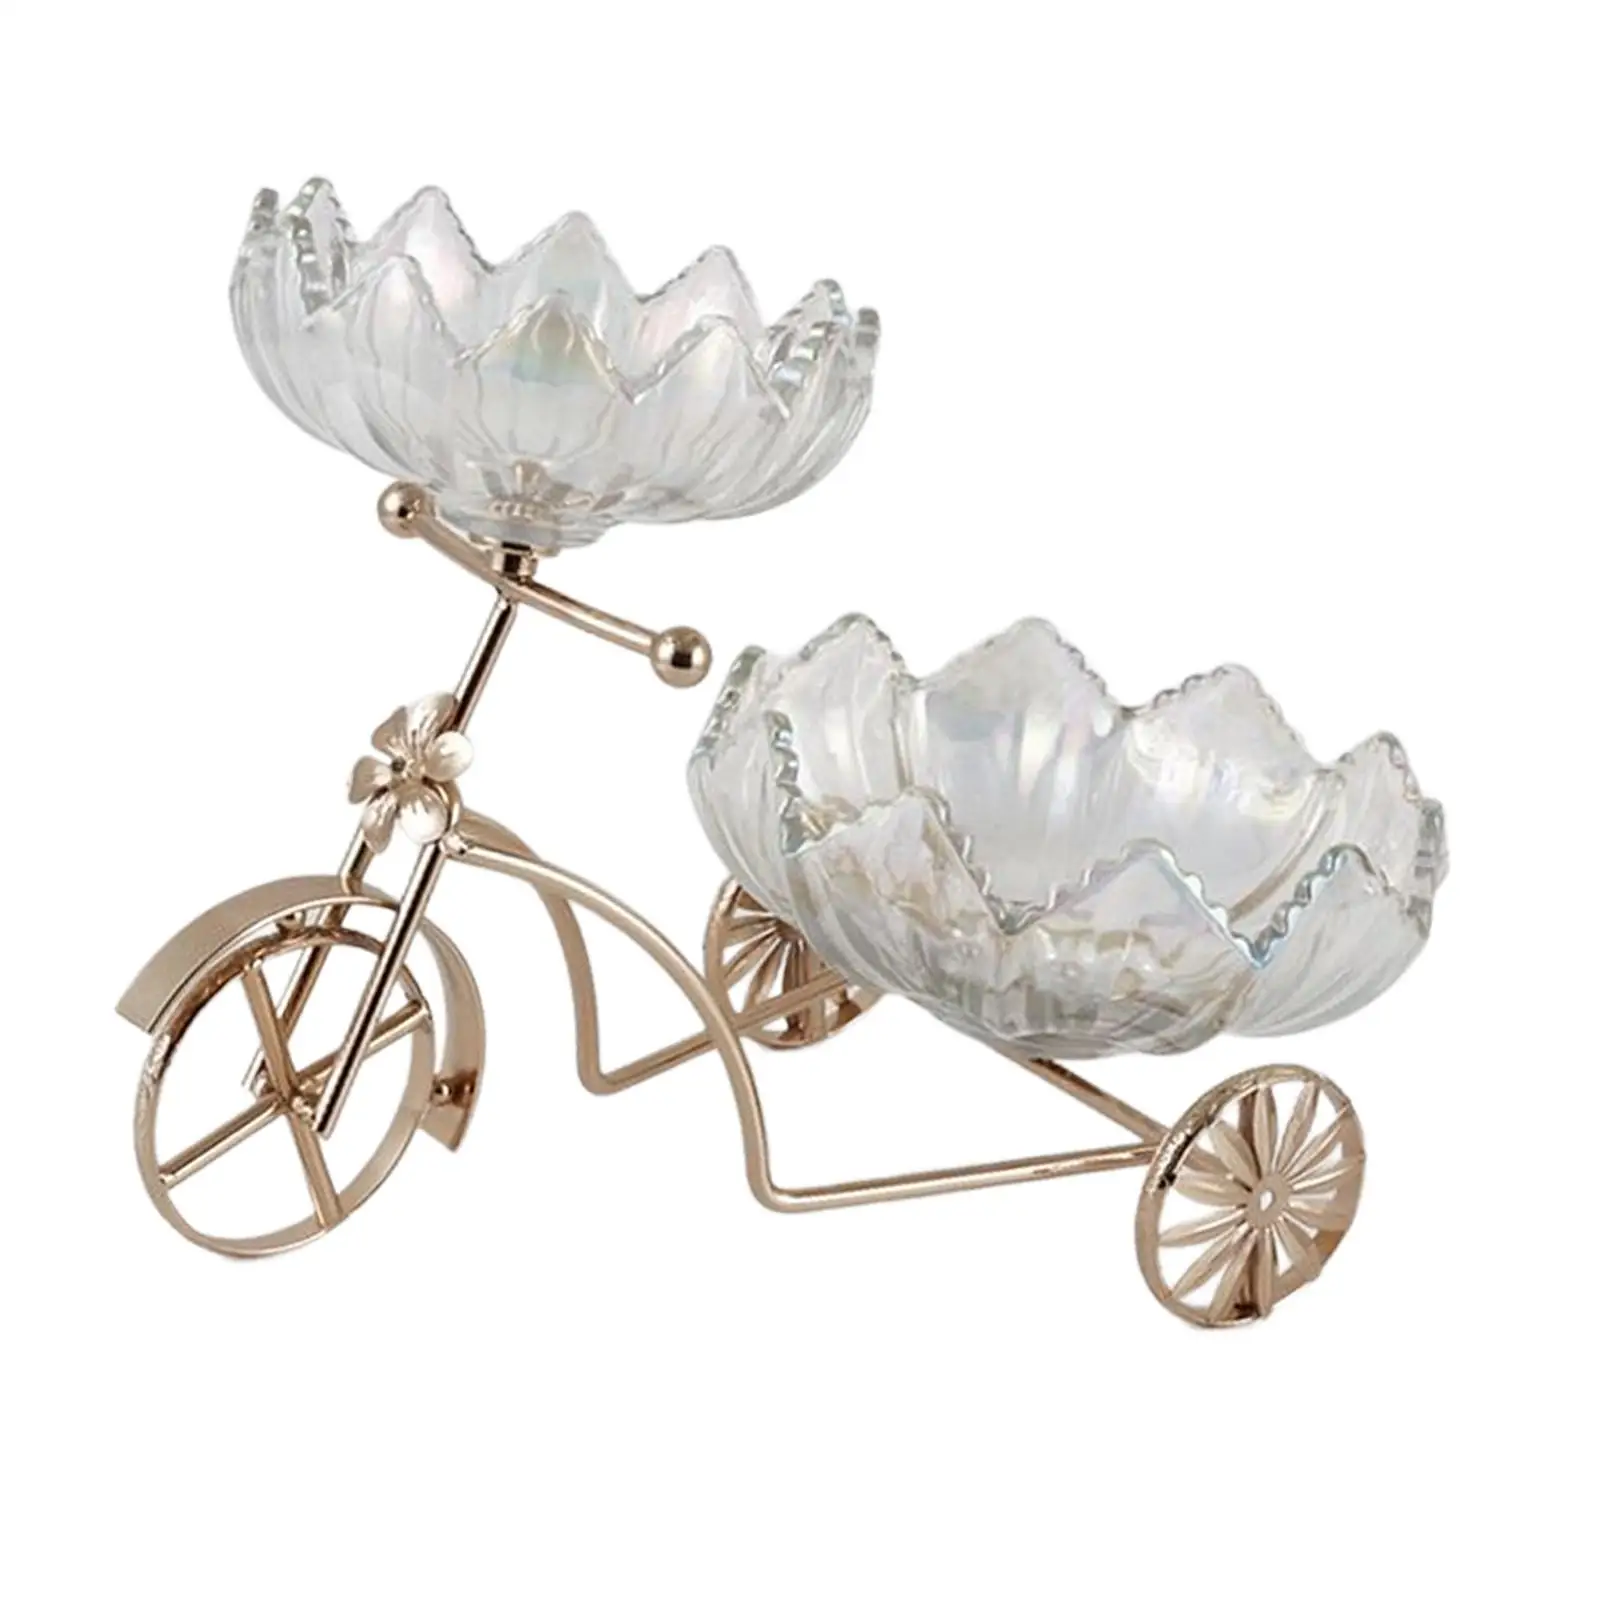 Cupcake Stand Tricycle Shape Easy to display Serving Platter Food Rack Stand for candy and fruit Pastry Kitchen Countertop